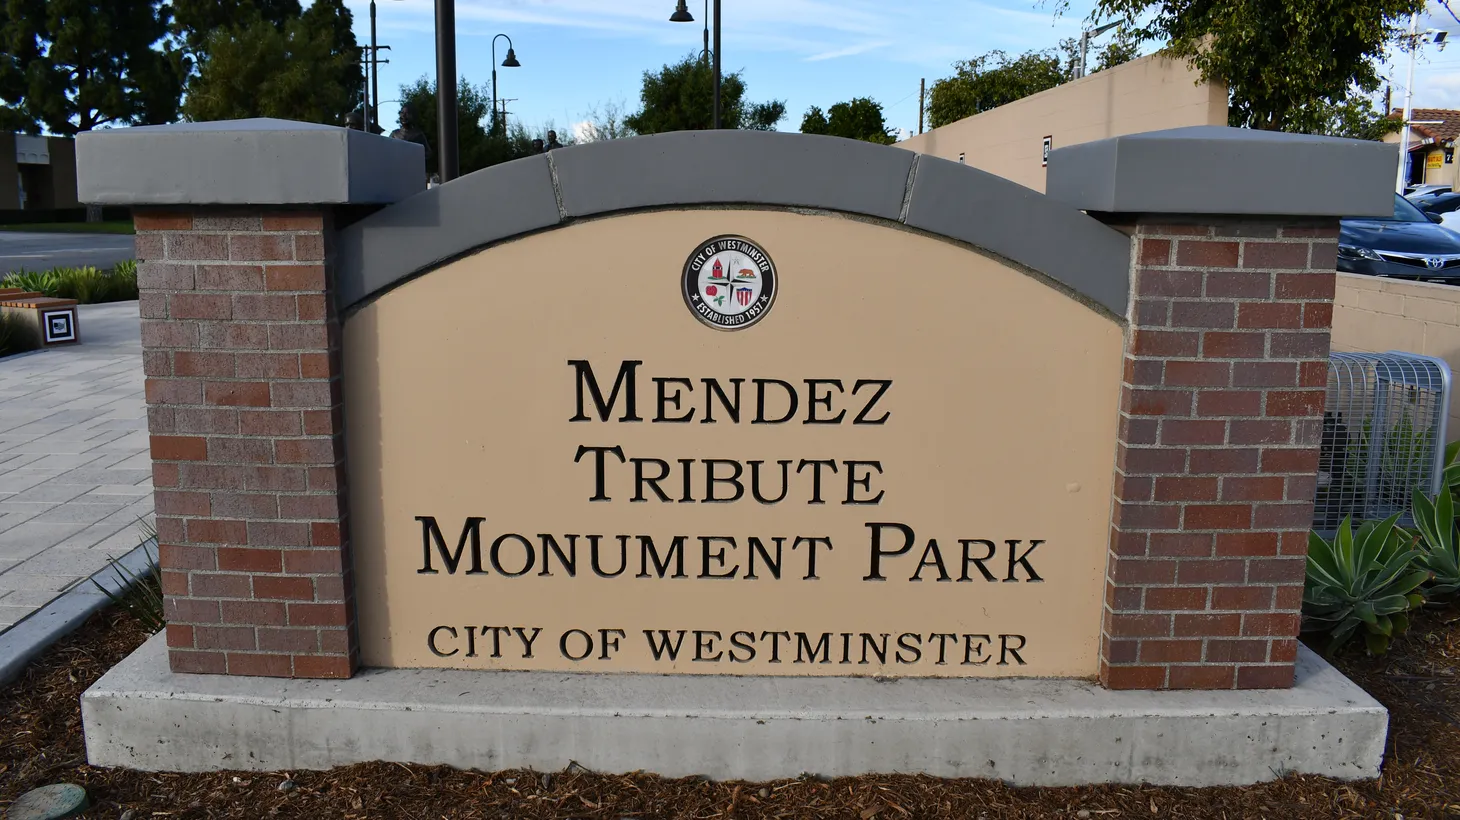 Mendez Tribute Monument Park is located at 7371 Westminster Blvd., Westminster, California 92683.